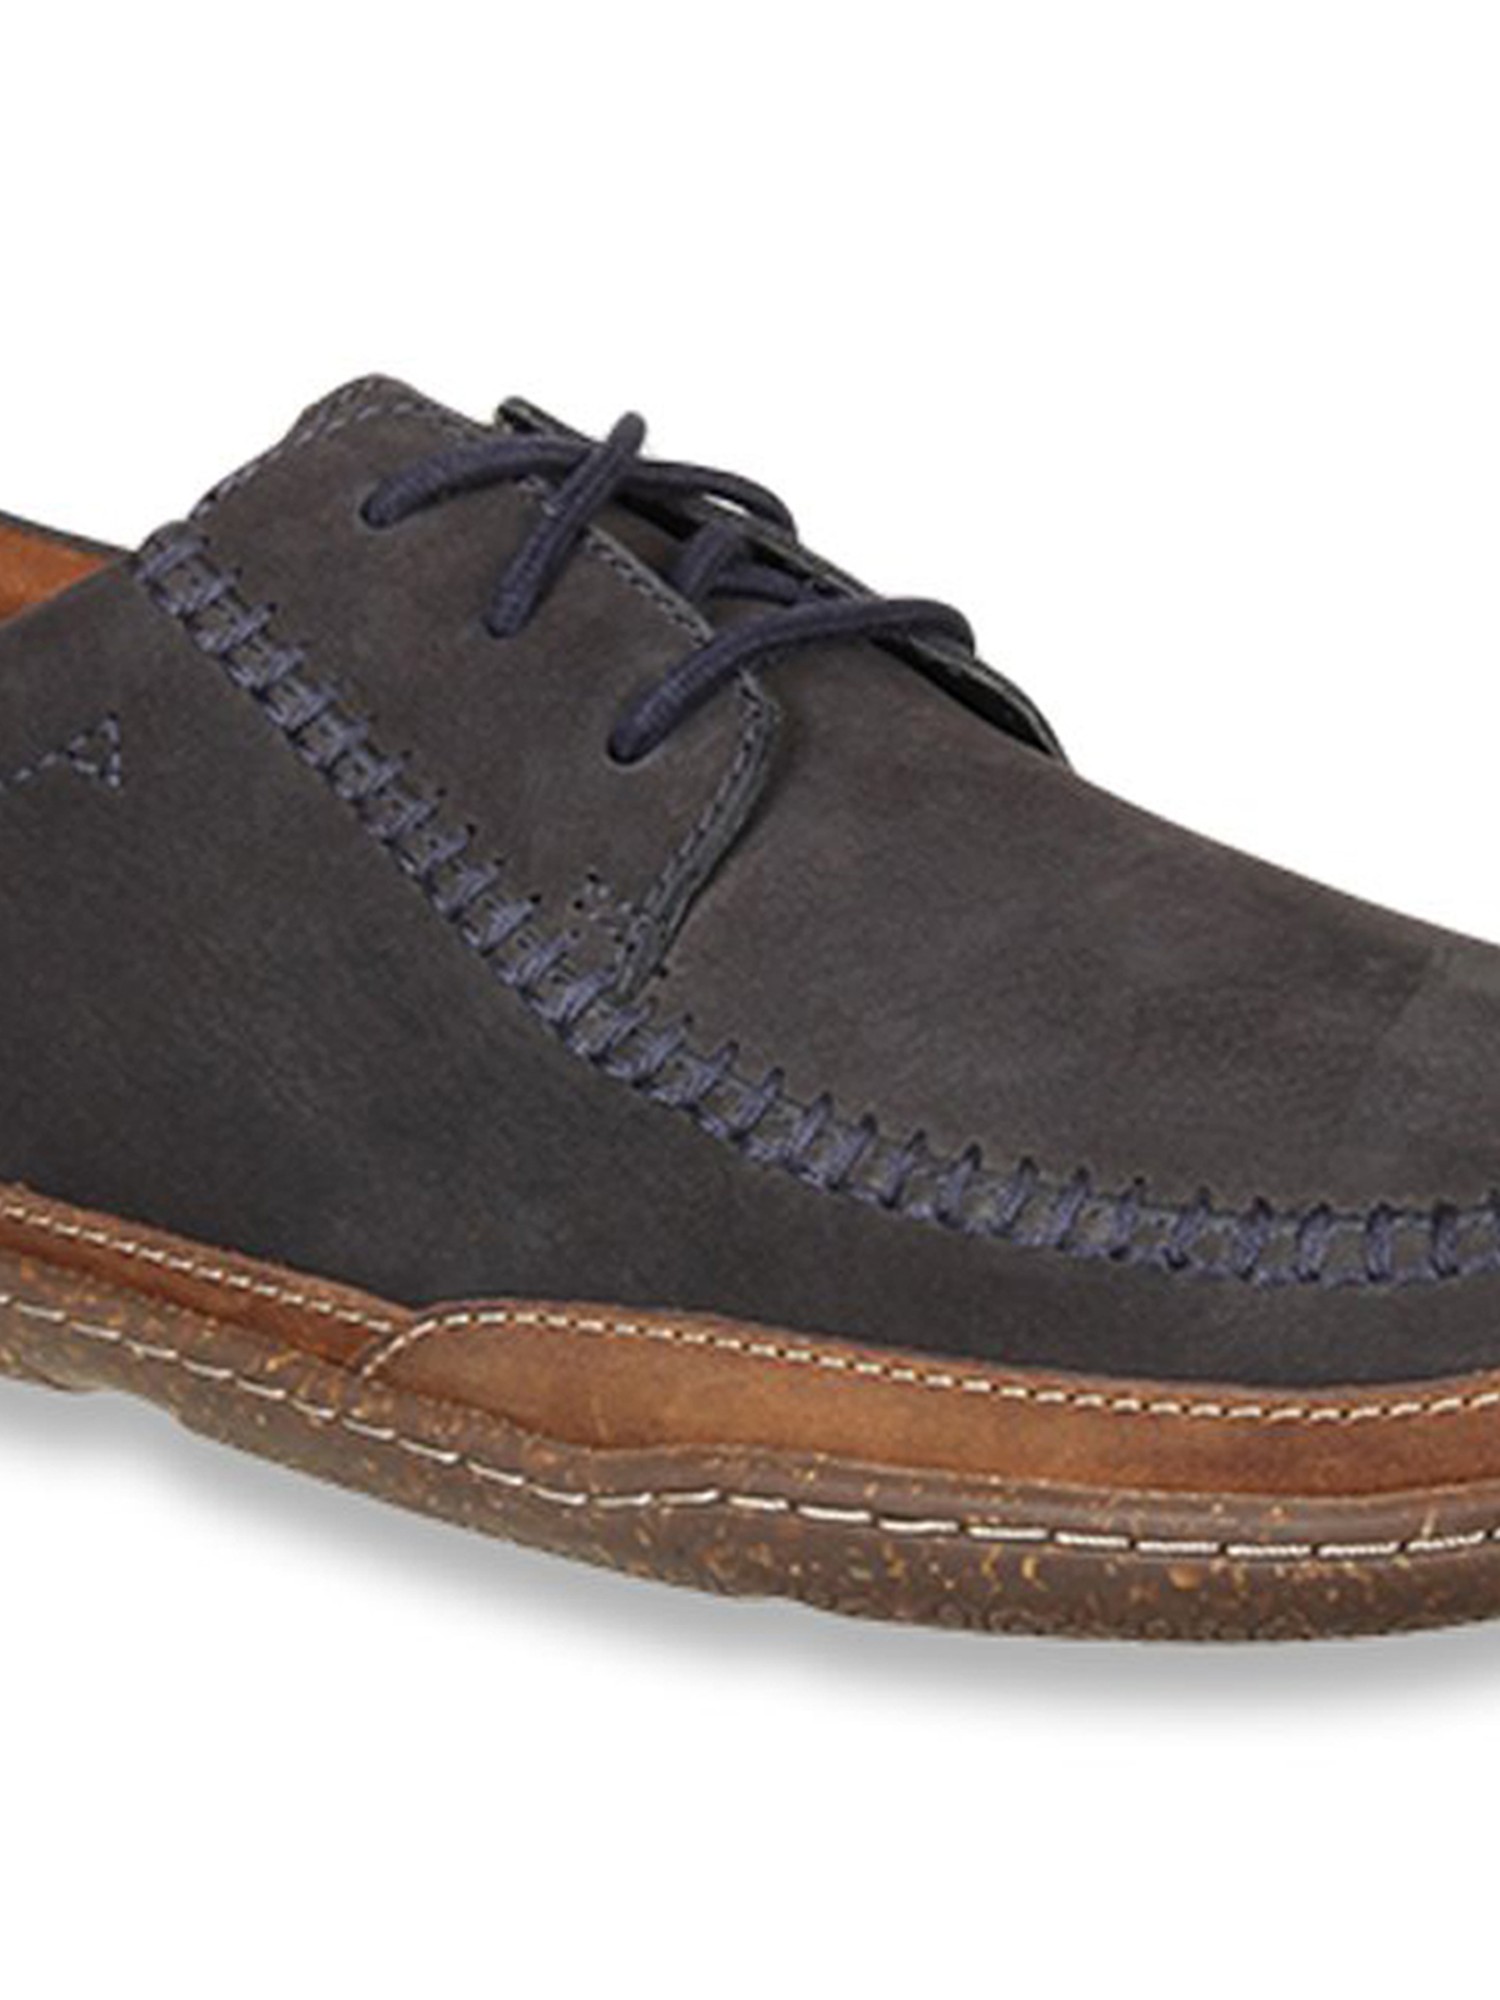 Buy Clarks Trapell Apron Shoes for Men at Best @ Tata CLiQ